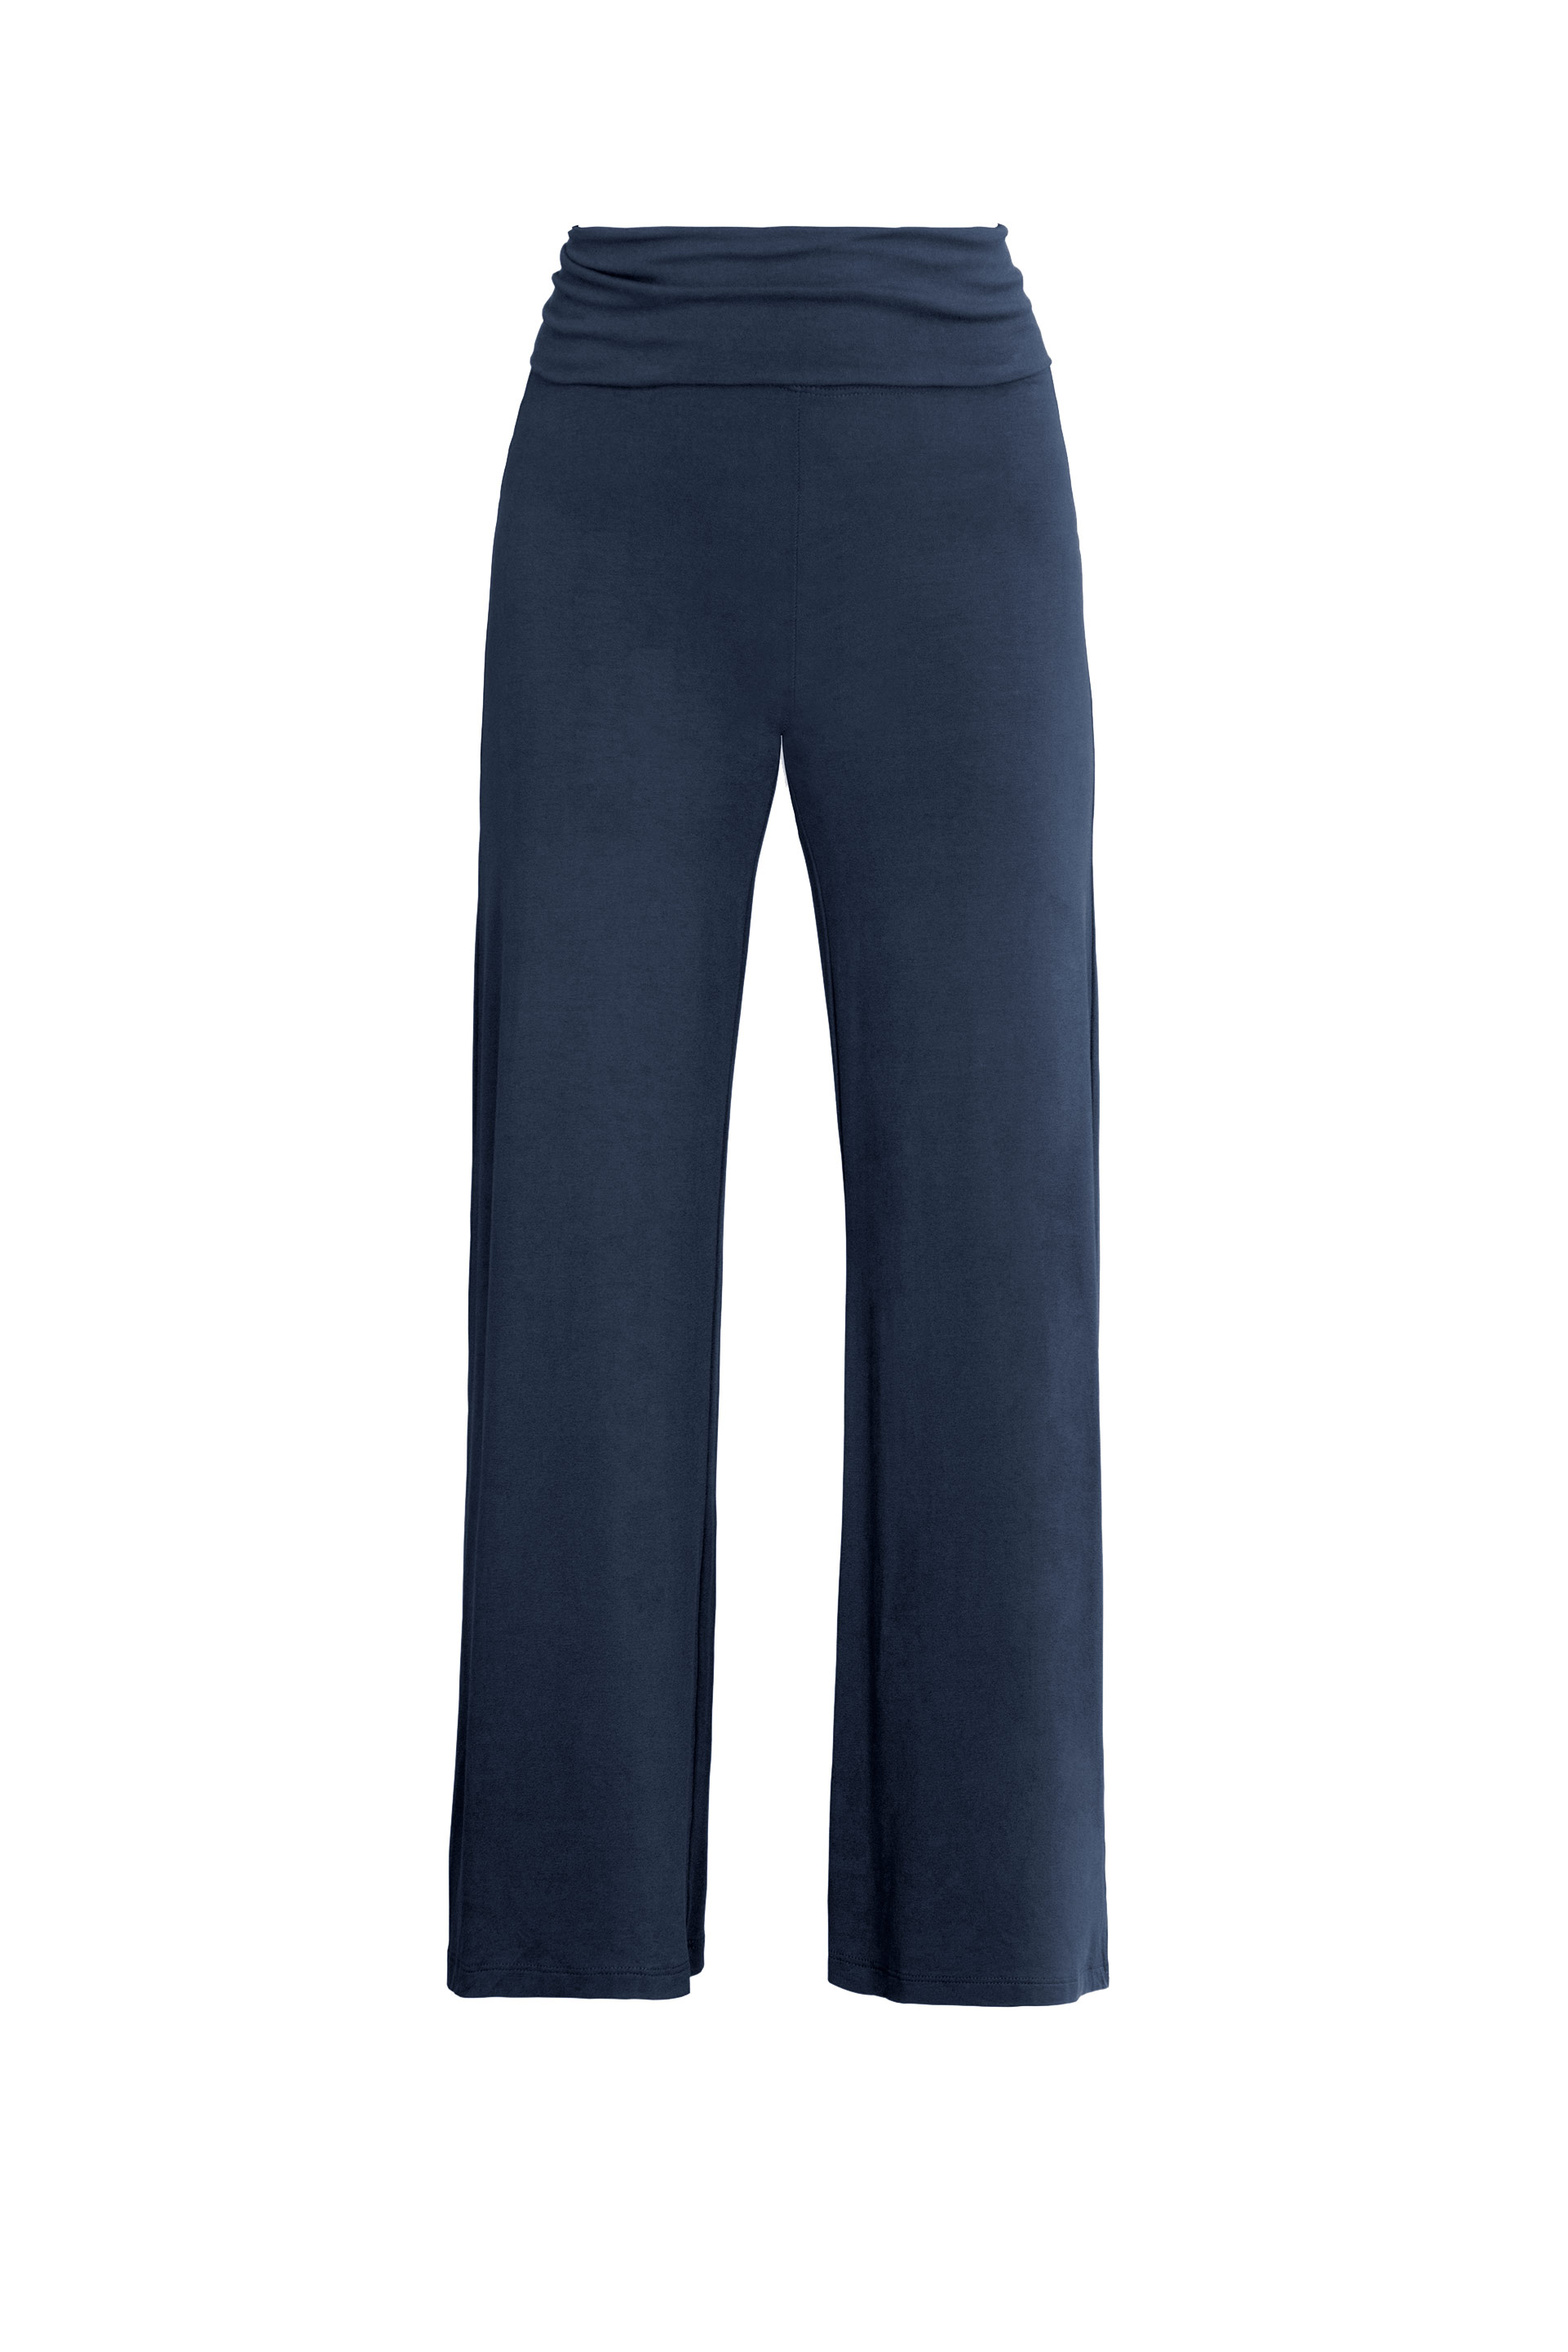 7327_palazzo_pants_sultry_navy.jpg